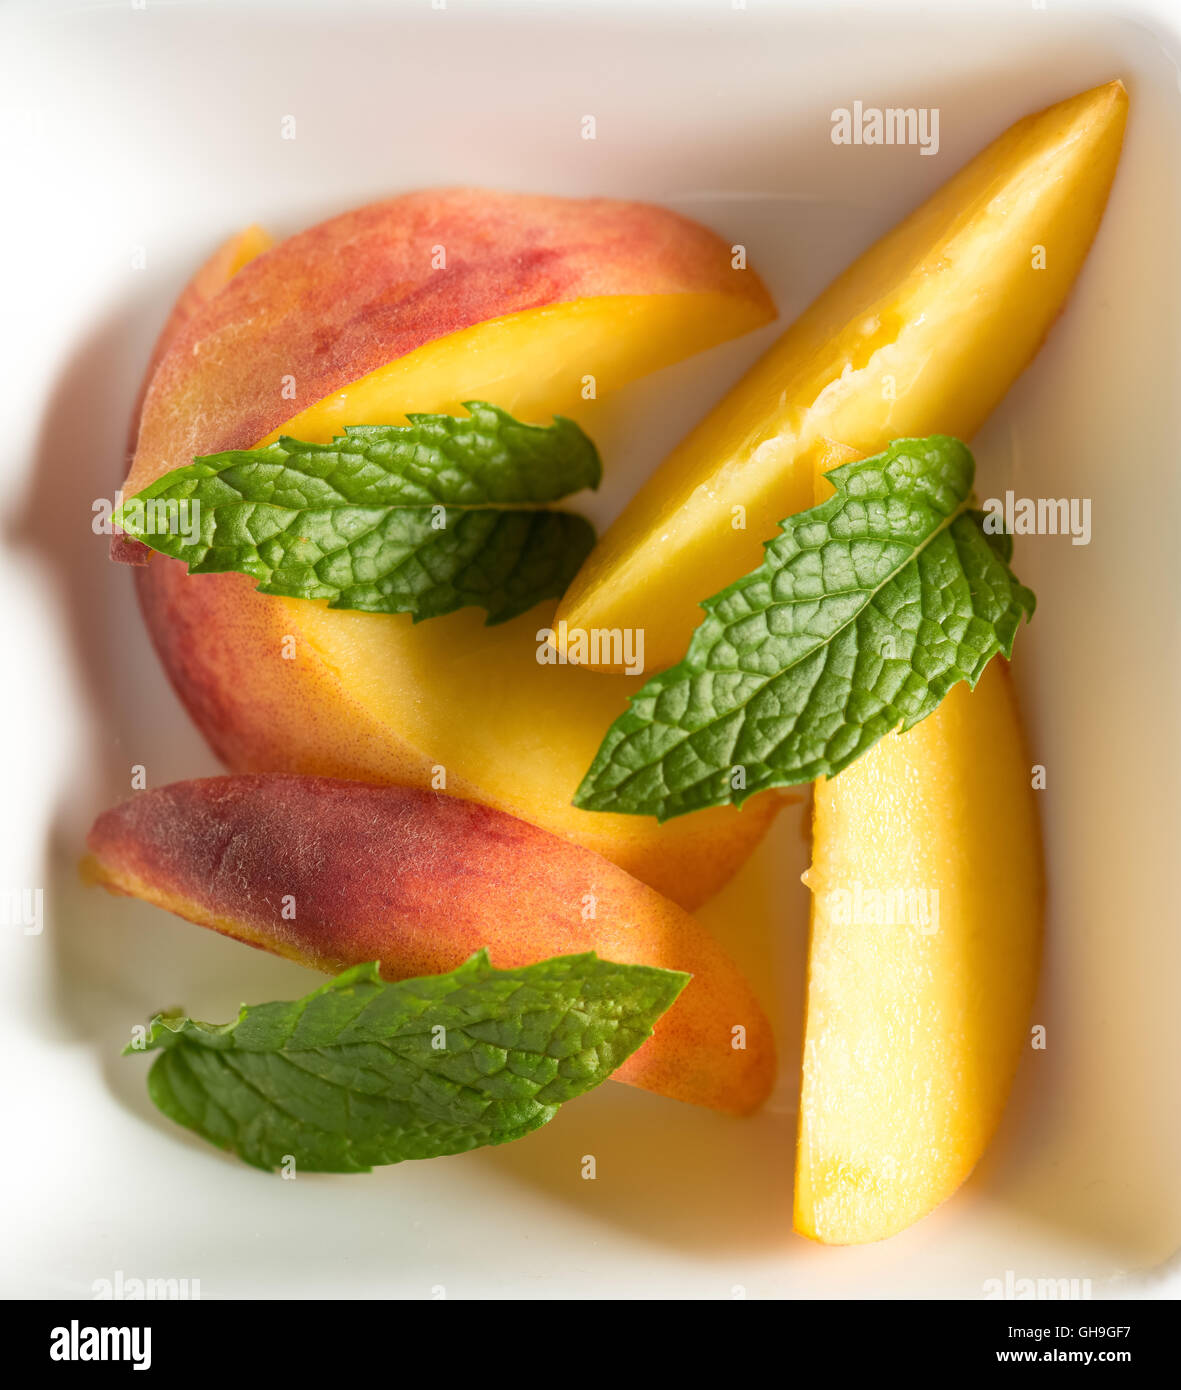 Raw peach slices served with mint Stock Photo